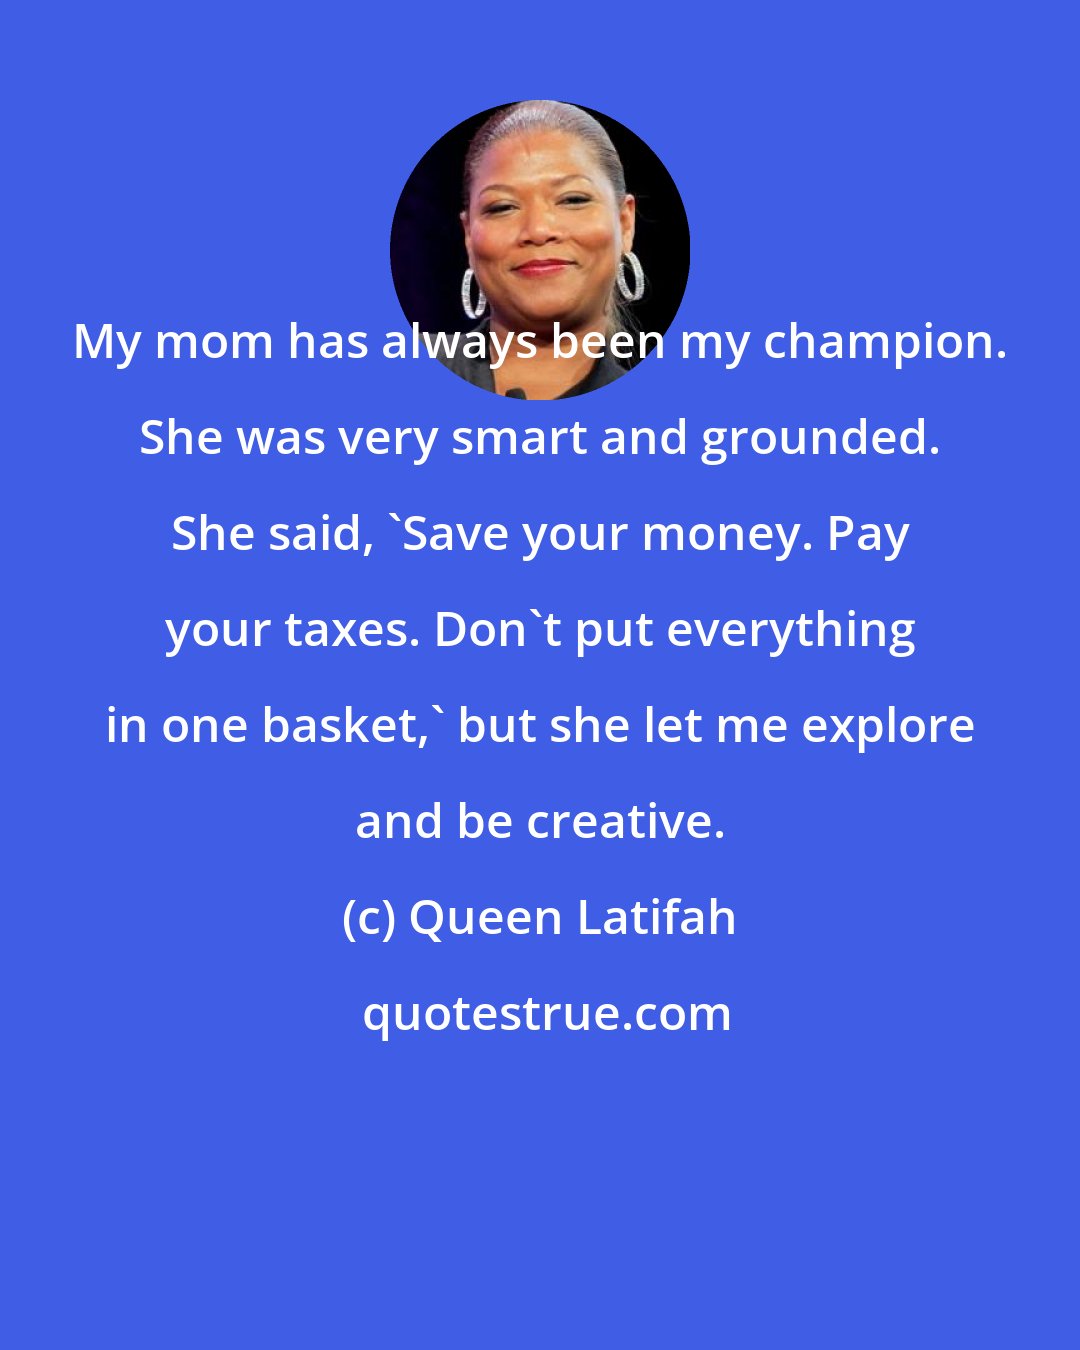 Queen Latifah: My mom has always been my champion. She was very smart and grounded. She said, 'Save your money. Pay your taxes. Don't put everything in one basket,' but she let me explore and be creative.